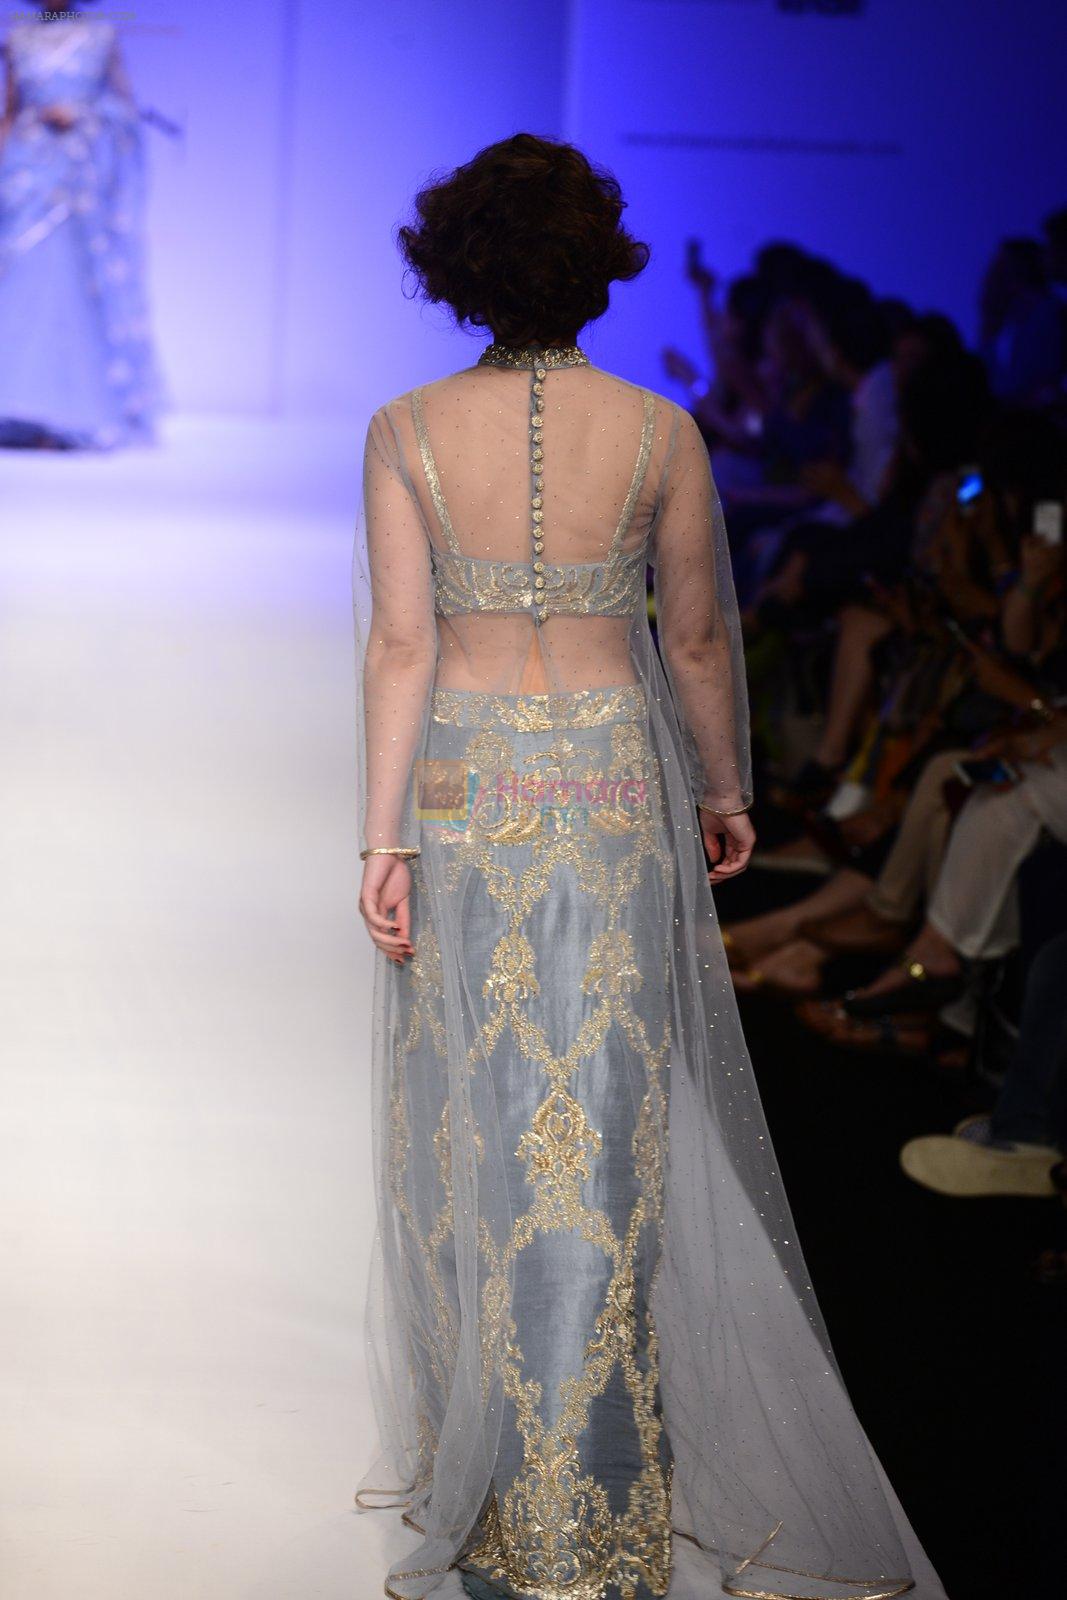 Model walk the ramp for Payal Singhal on day 1 of Amazon India Fashion Week on 25th March 2015